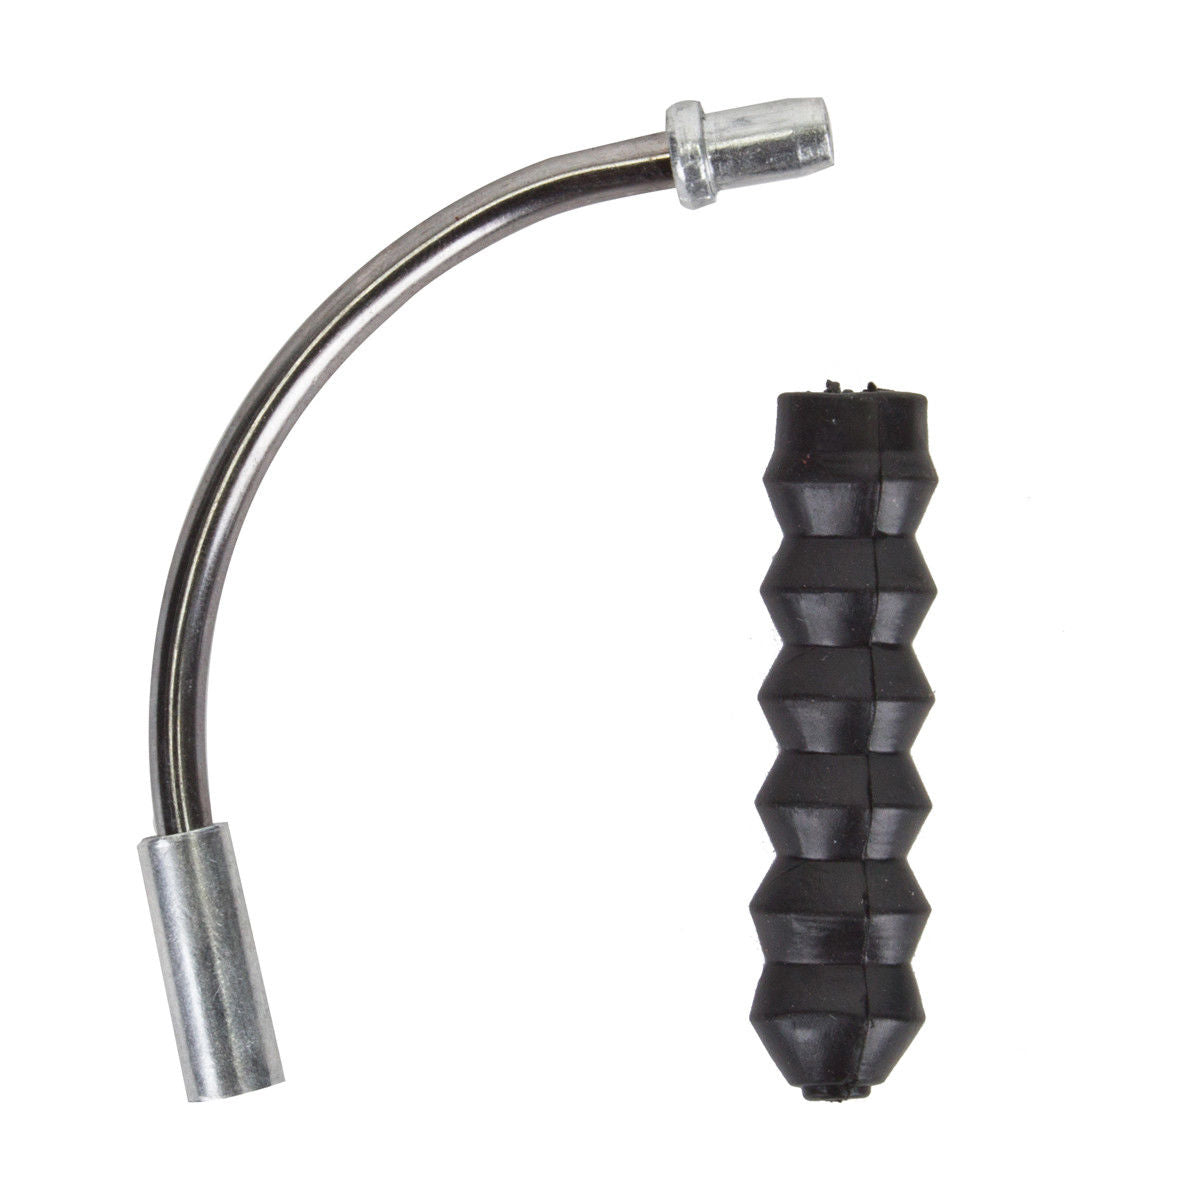 Linear Pull Brake Cable Guide and Boot - V-brake Noodle - 90 degree